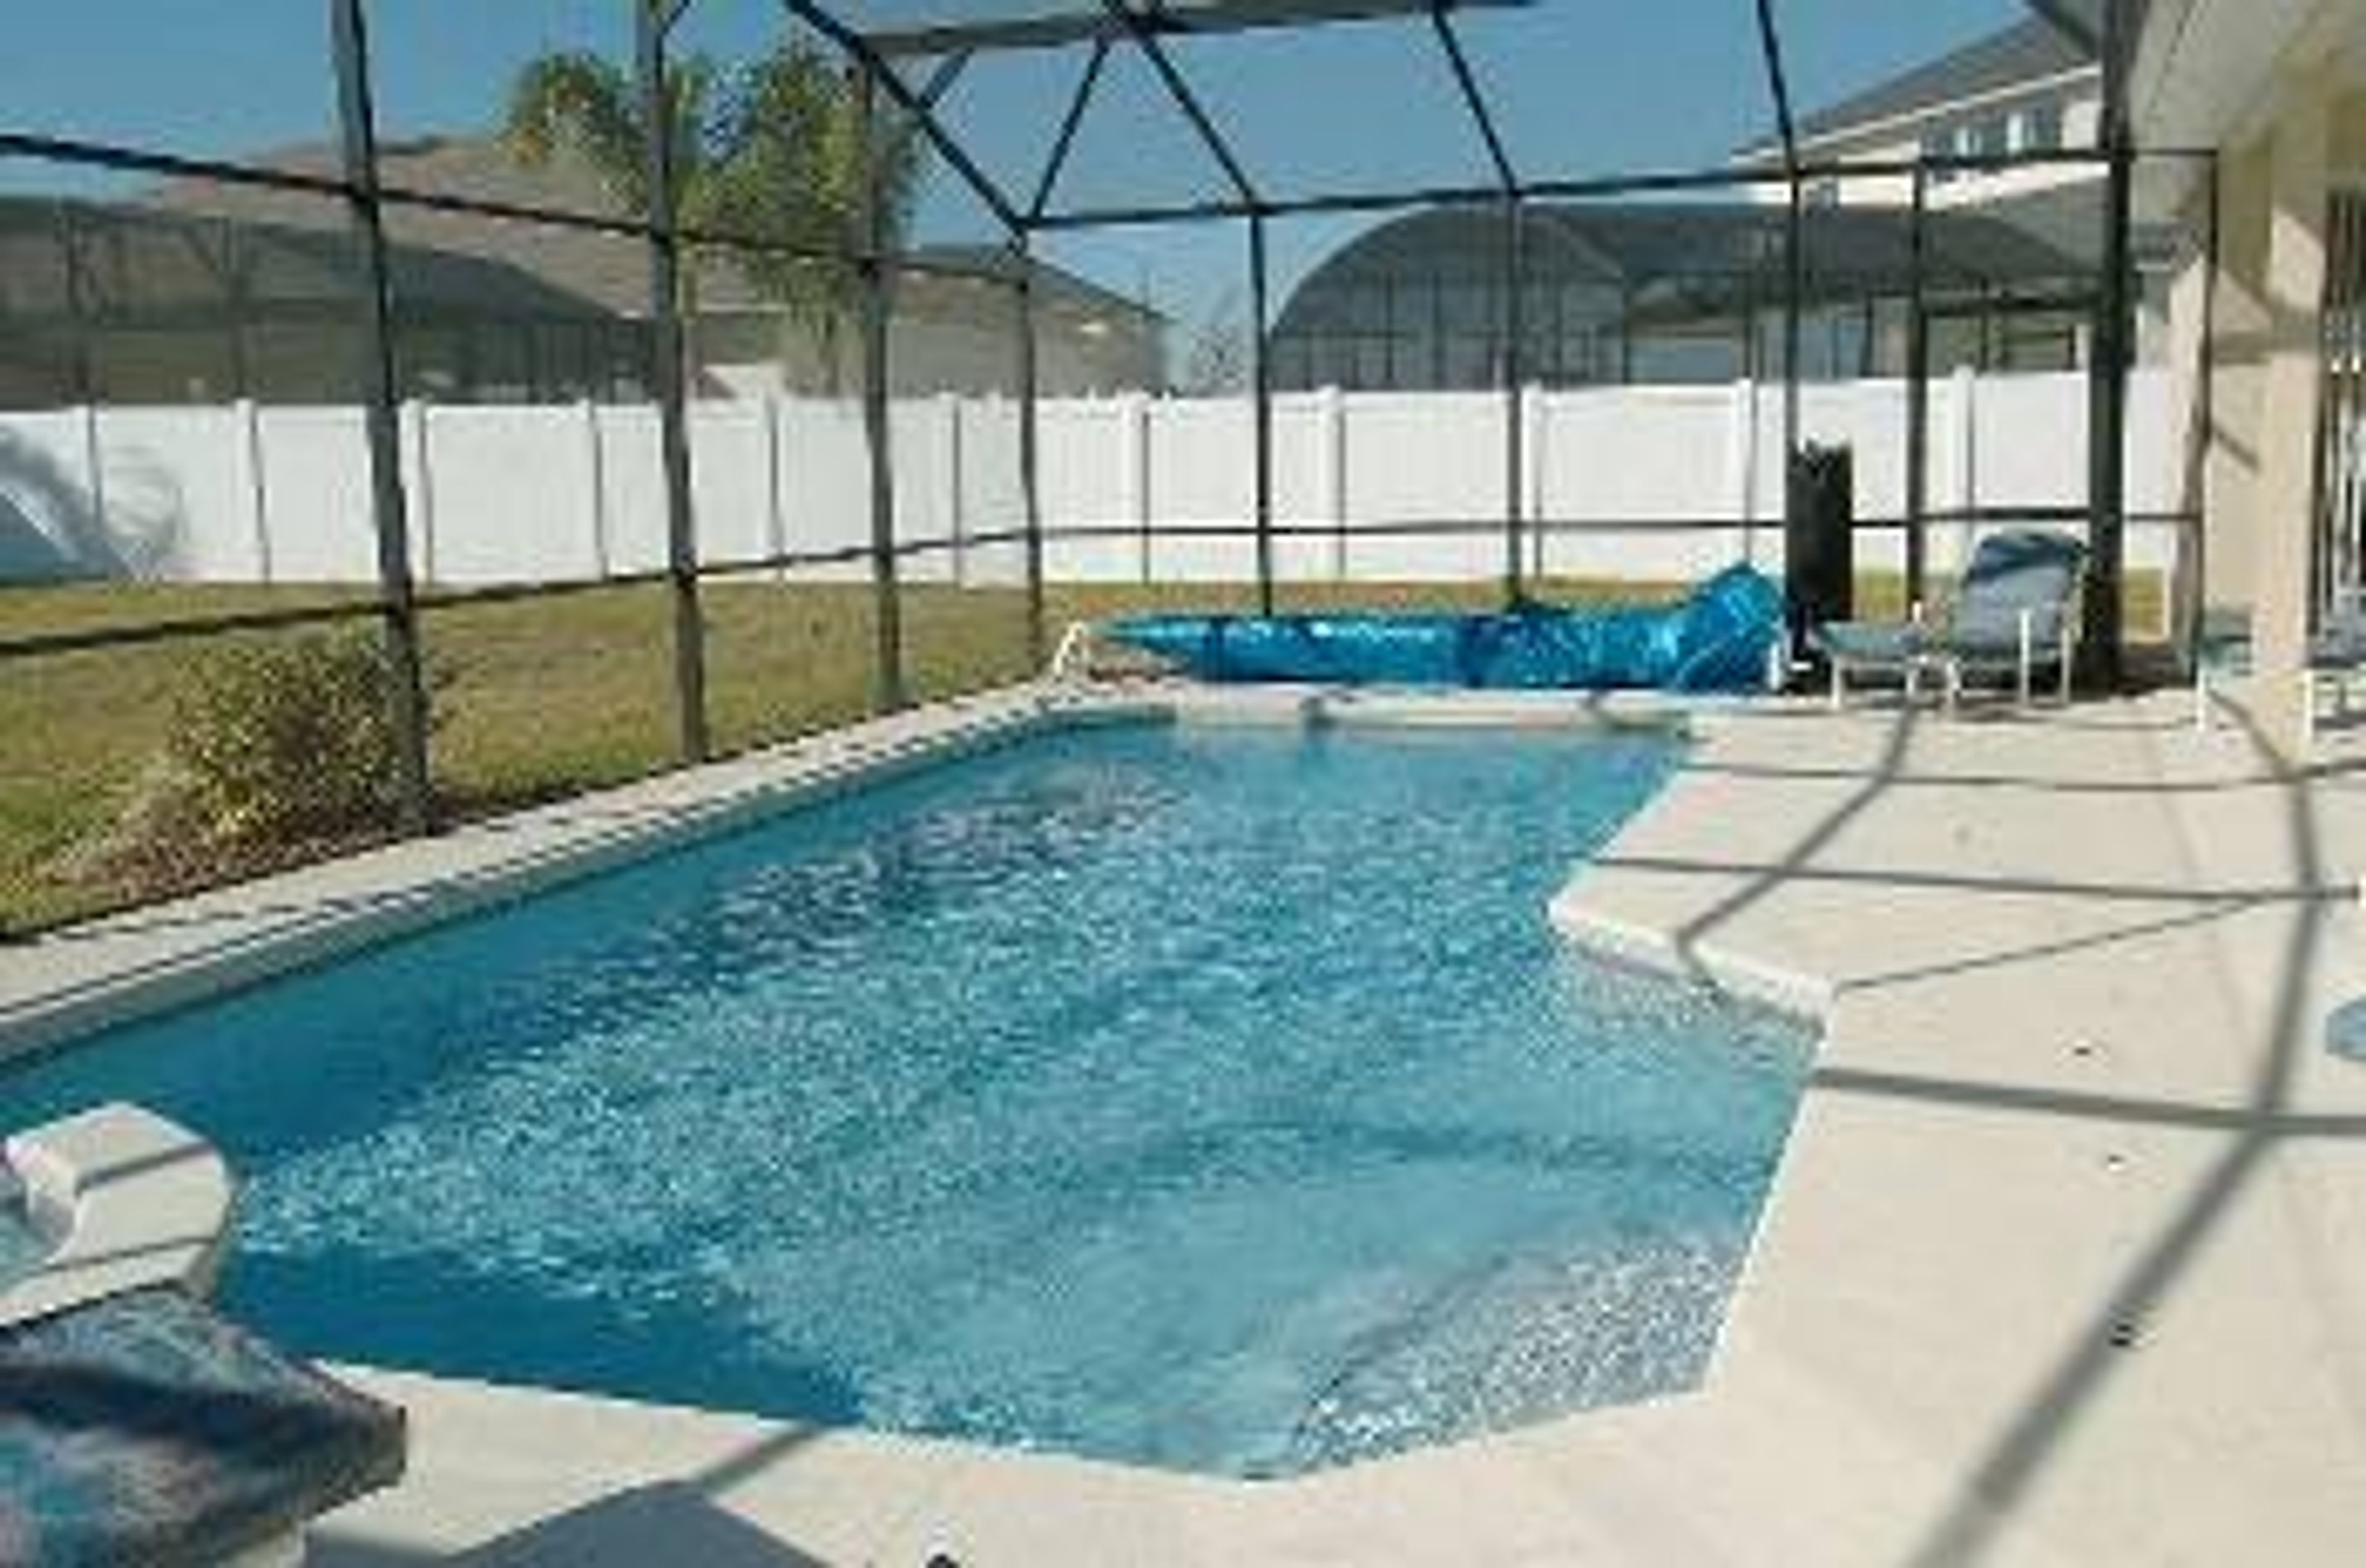 Fully Enclosed - Pool and patio area with garden